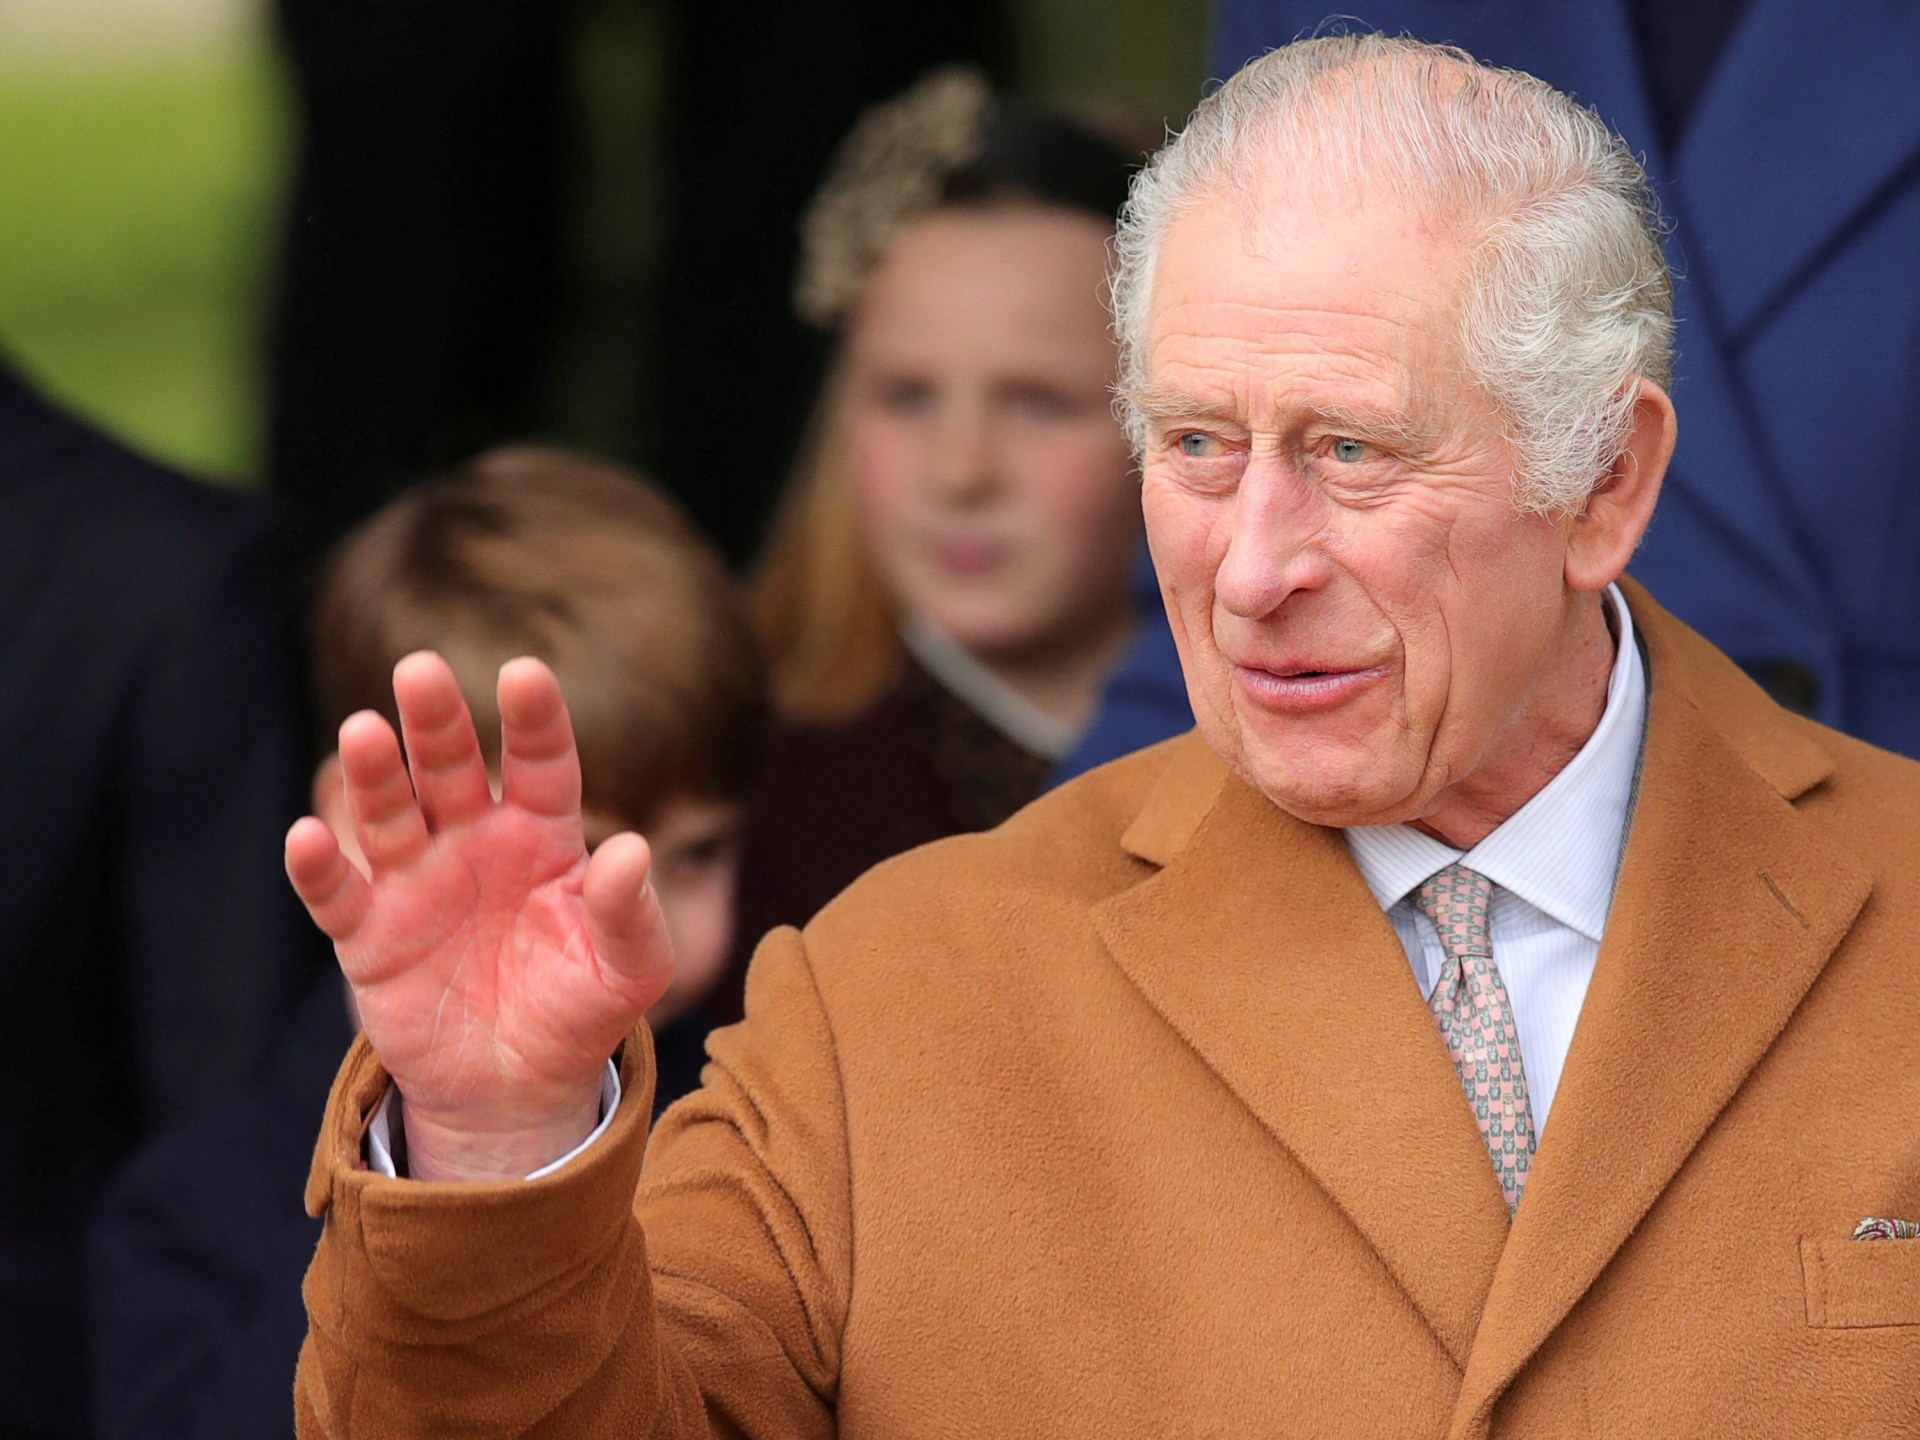 The UK’s King Charles to undergo treatment for enlarged prostate | Politics News